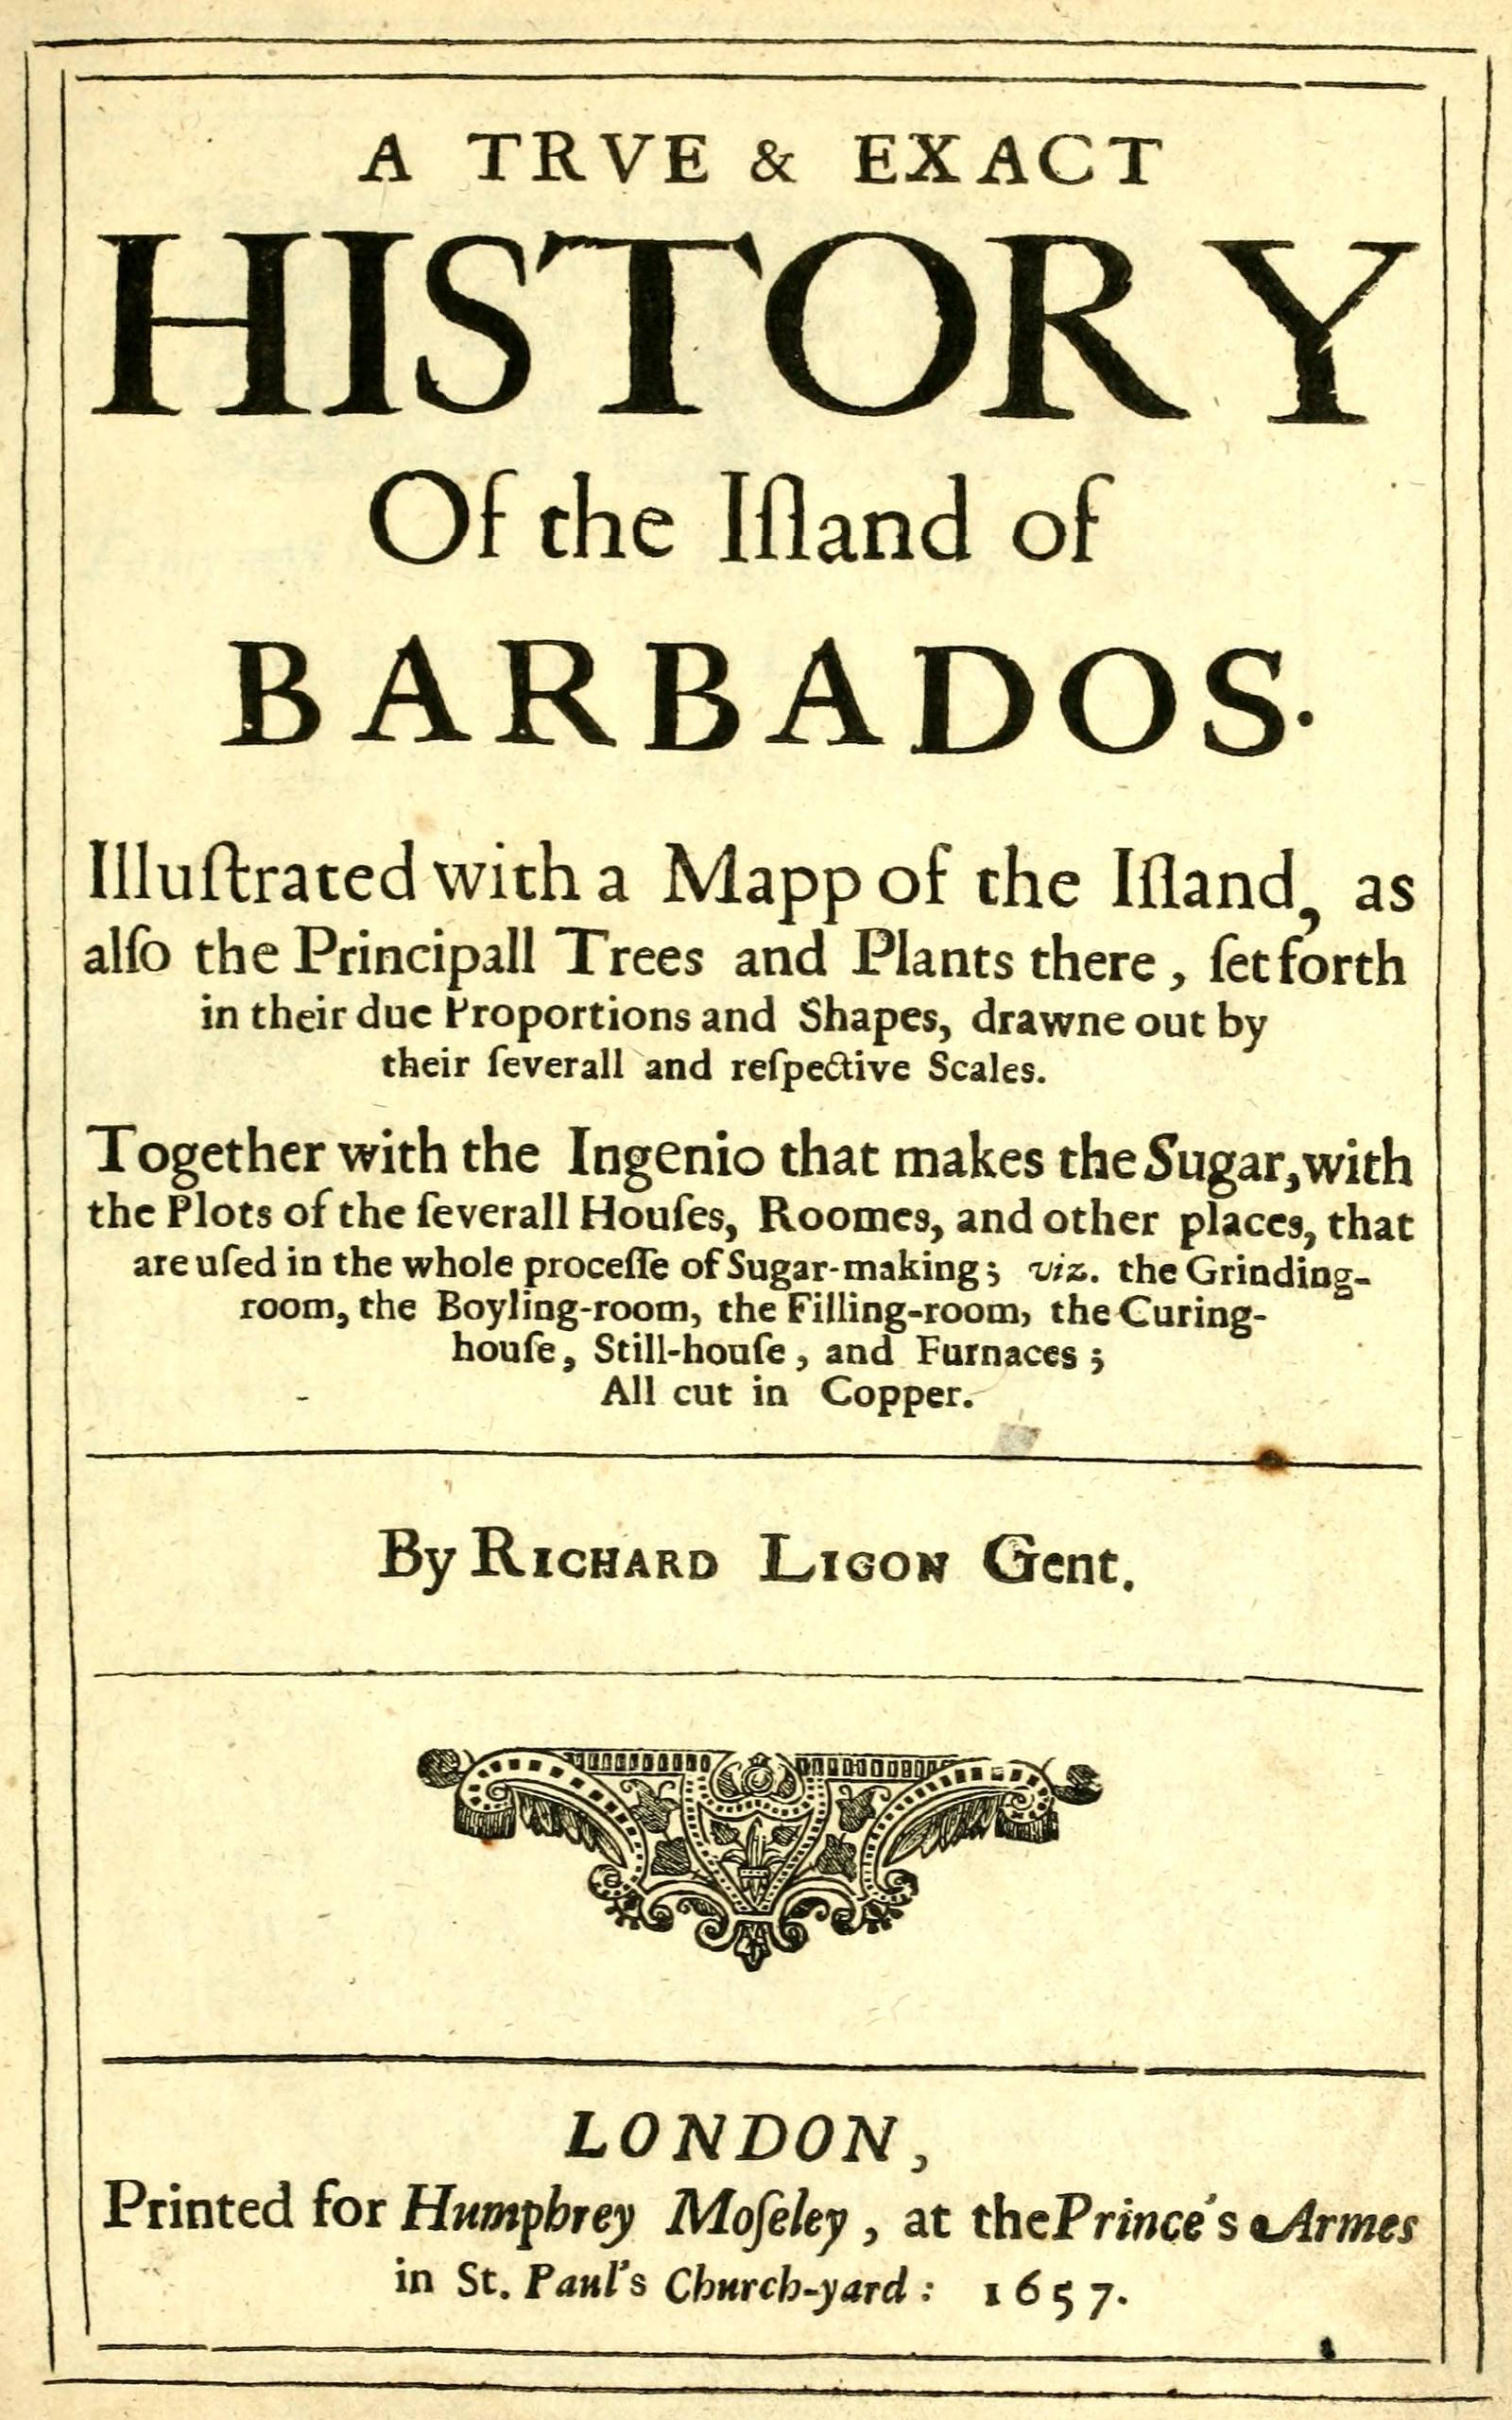 A true & exact history of the island of Barbados